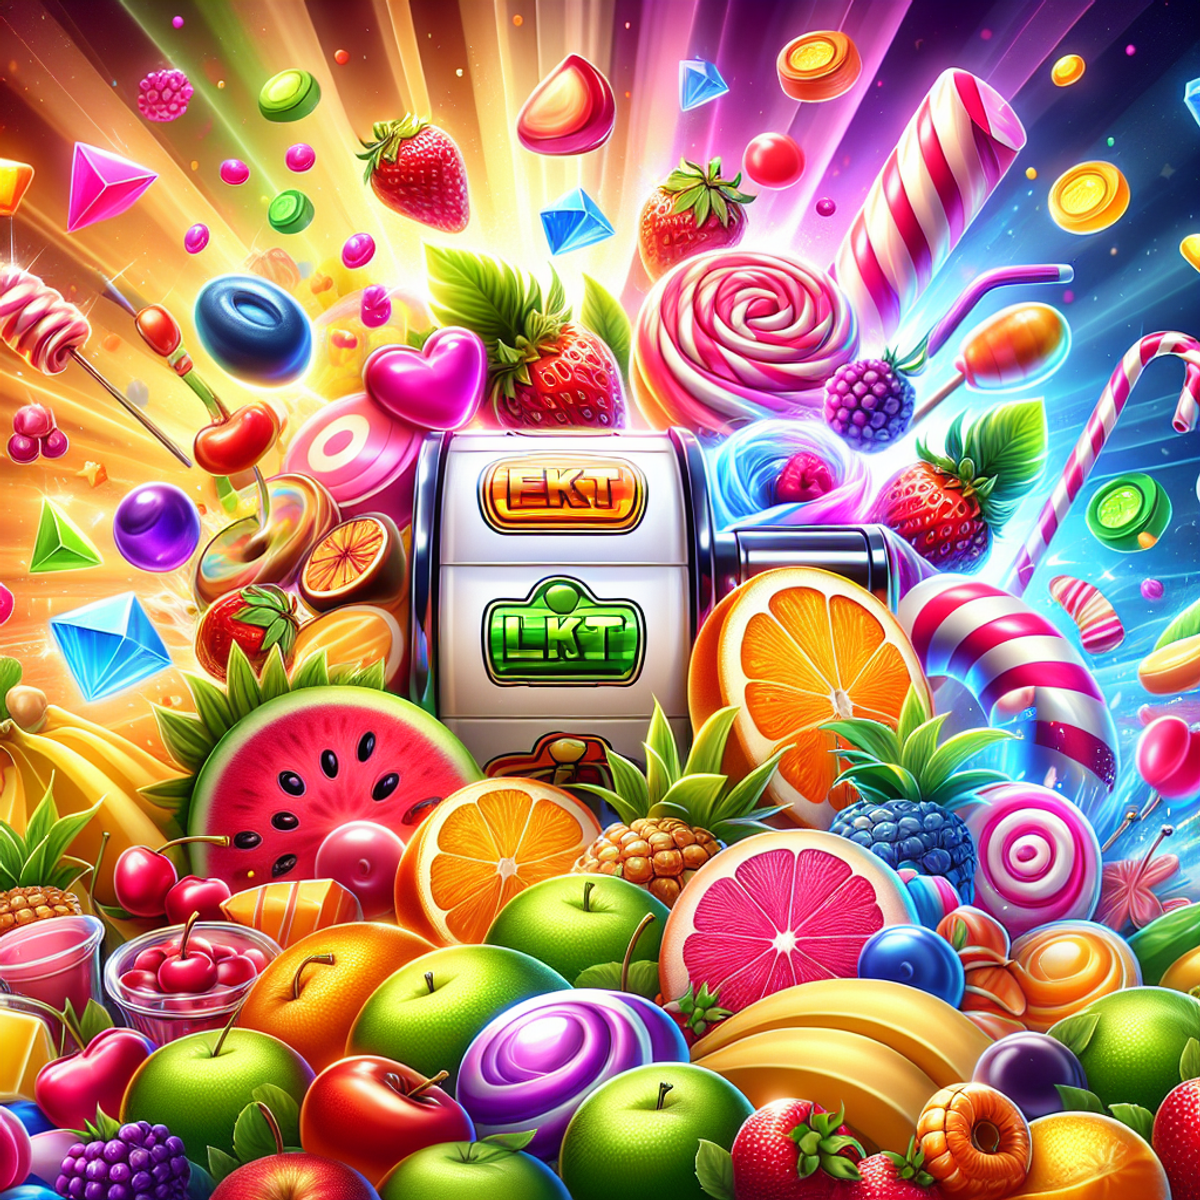 A colorful and vibrant slot game featuring fruits, candies, and sweet treats in a visually appealing and energetic environment.